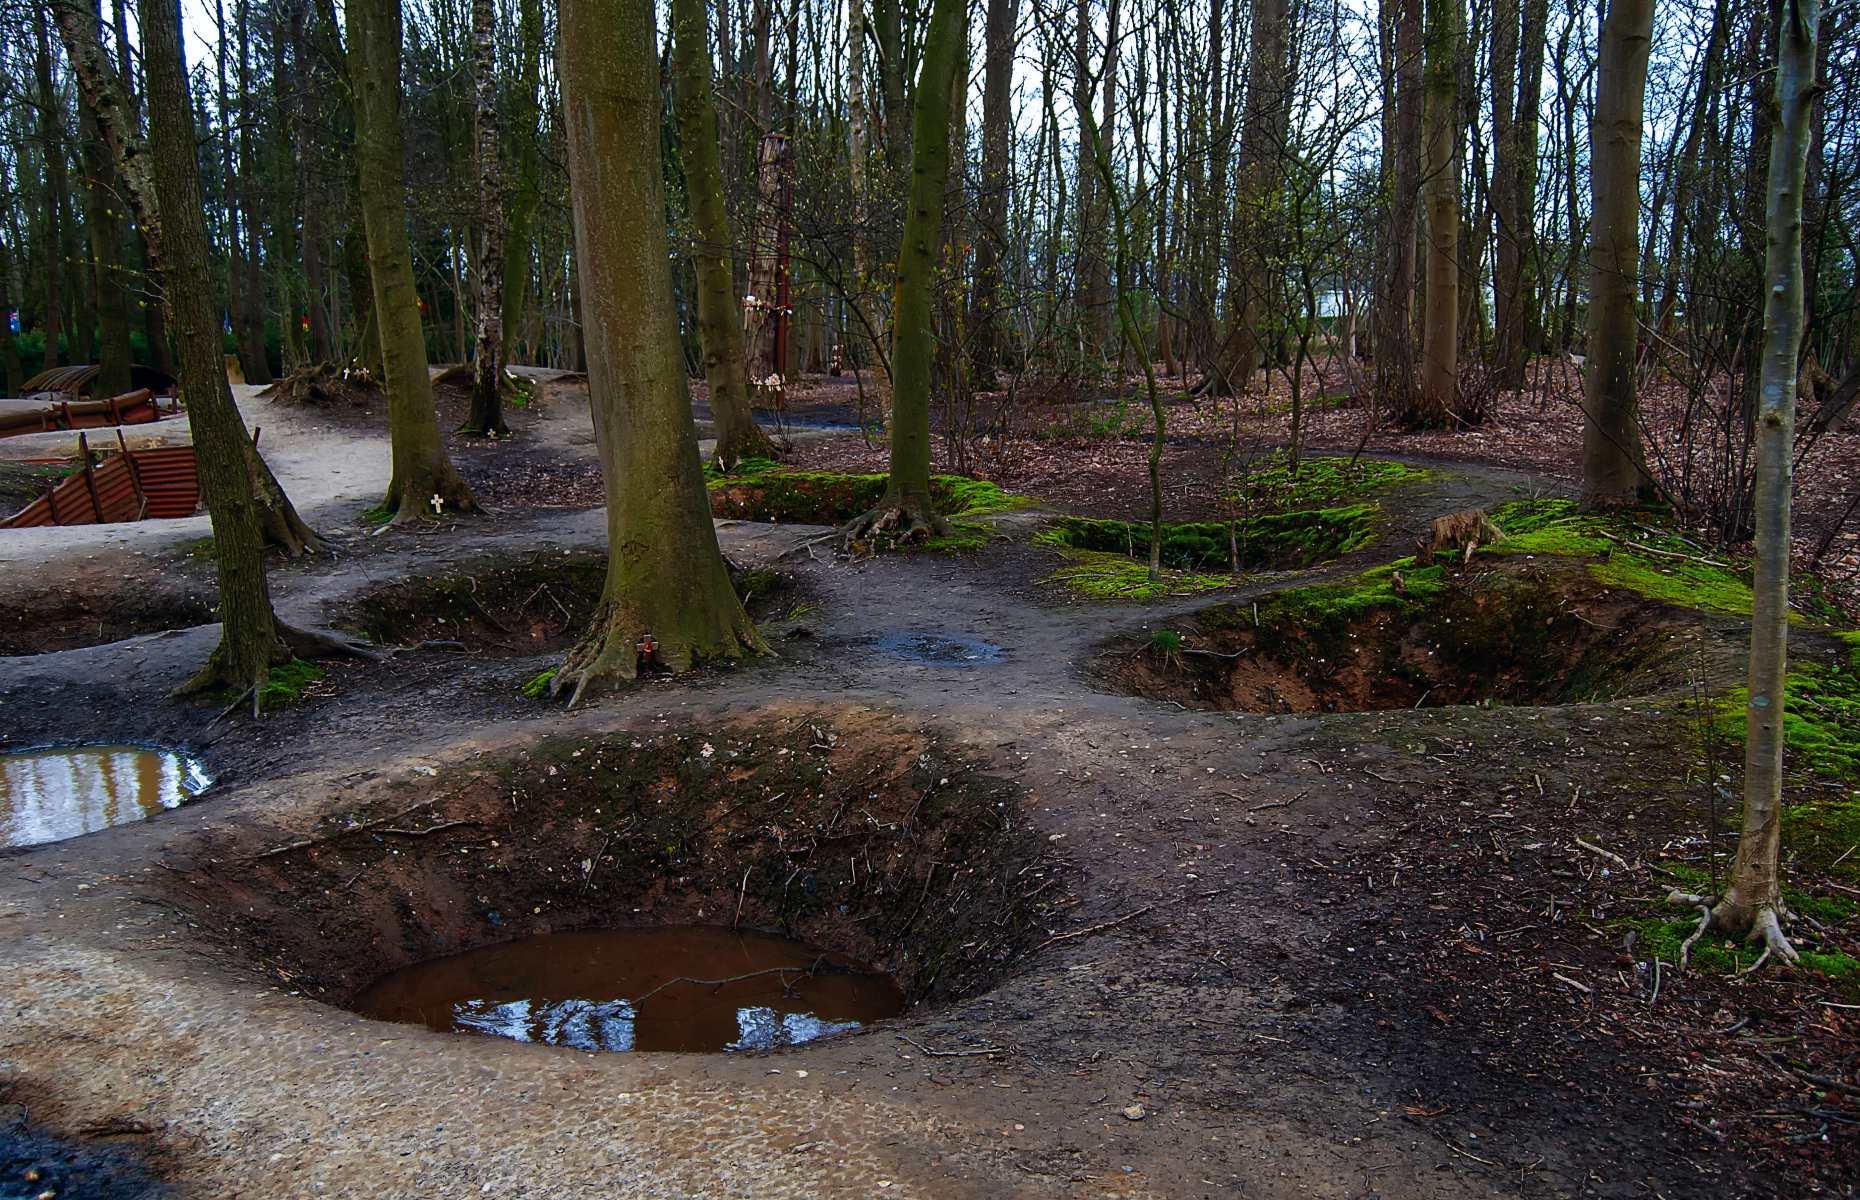 The eerie First World War sites you can still see today